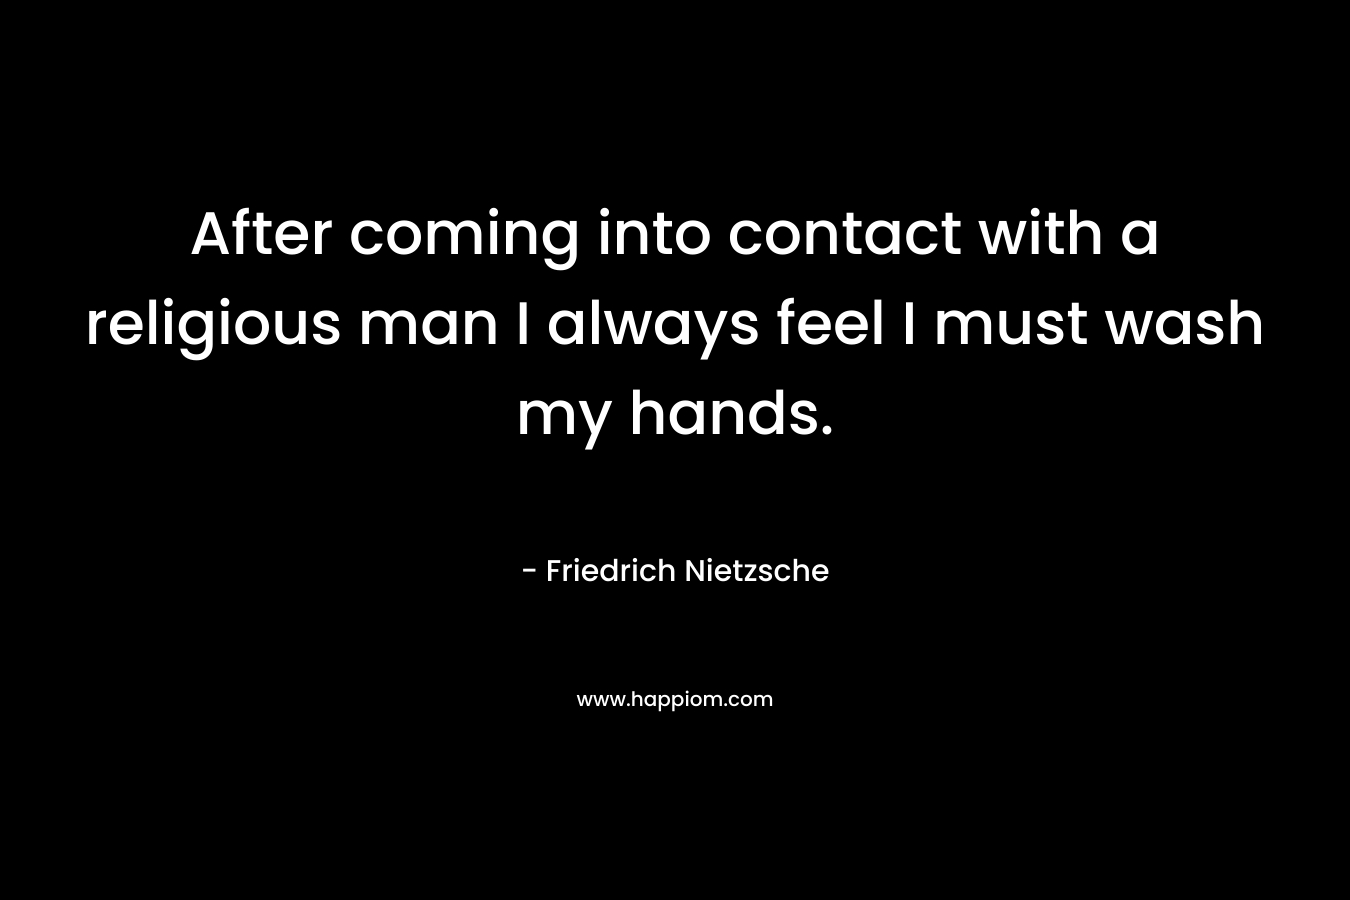 After coming into contact with a religious man I always feel I must wash my hands. – Friedrich Nietzsche